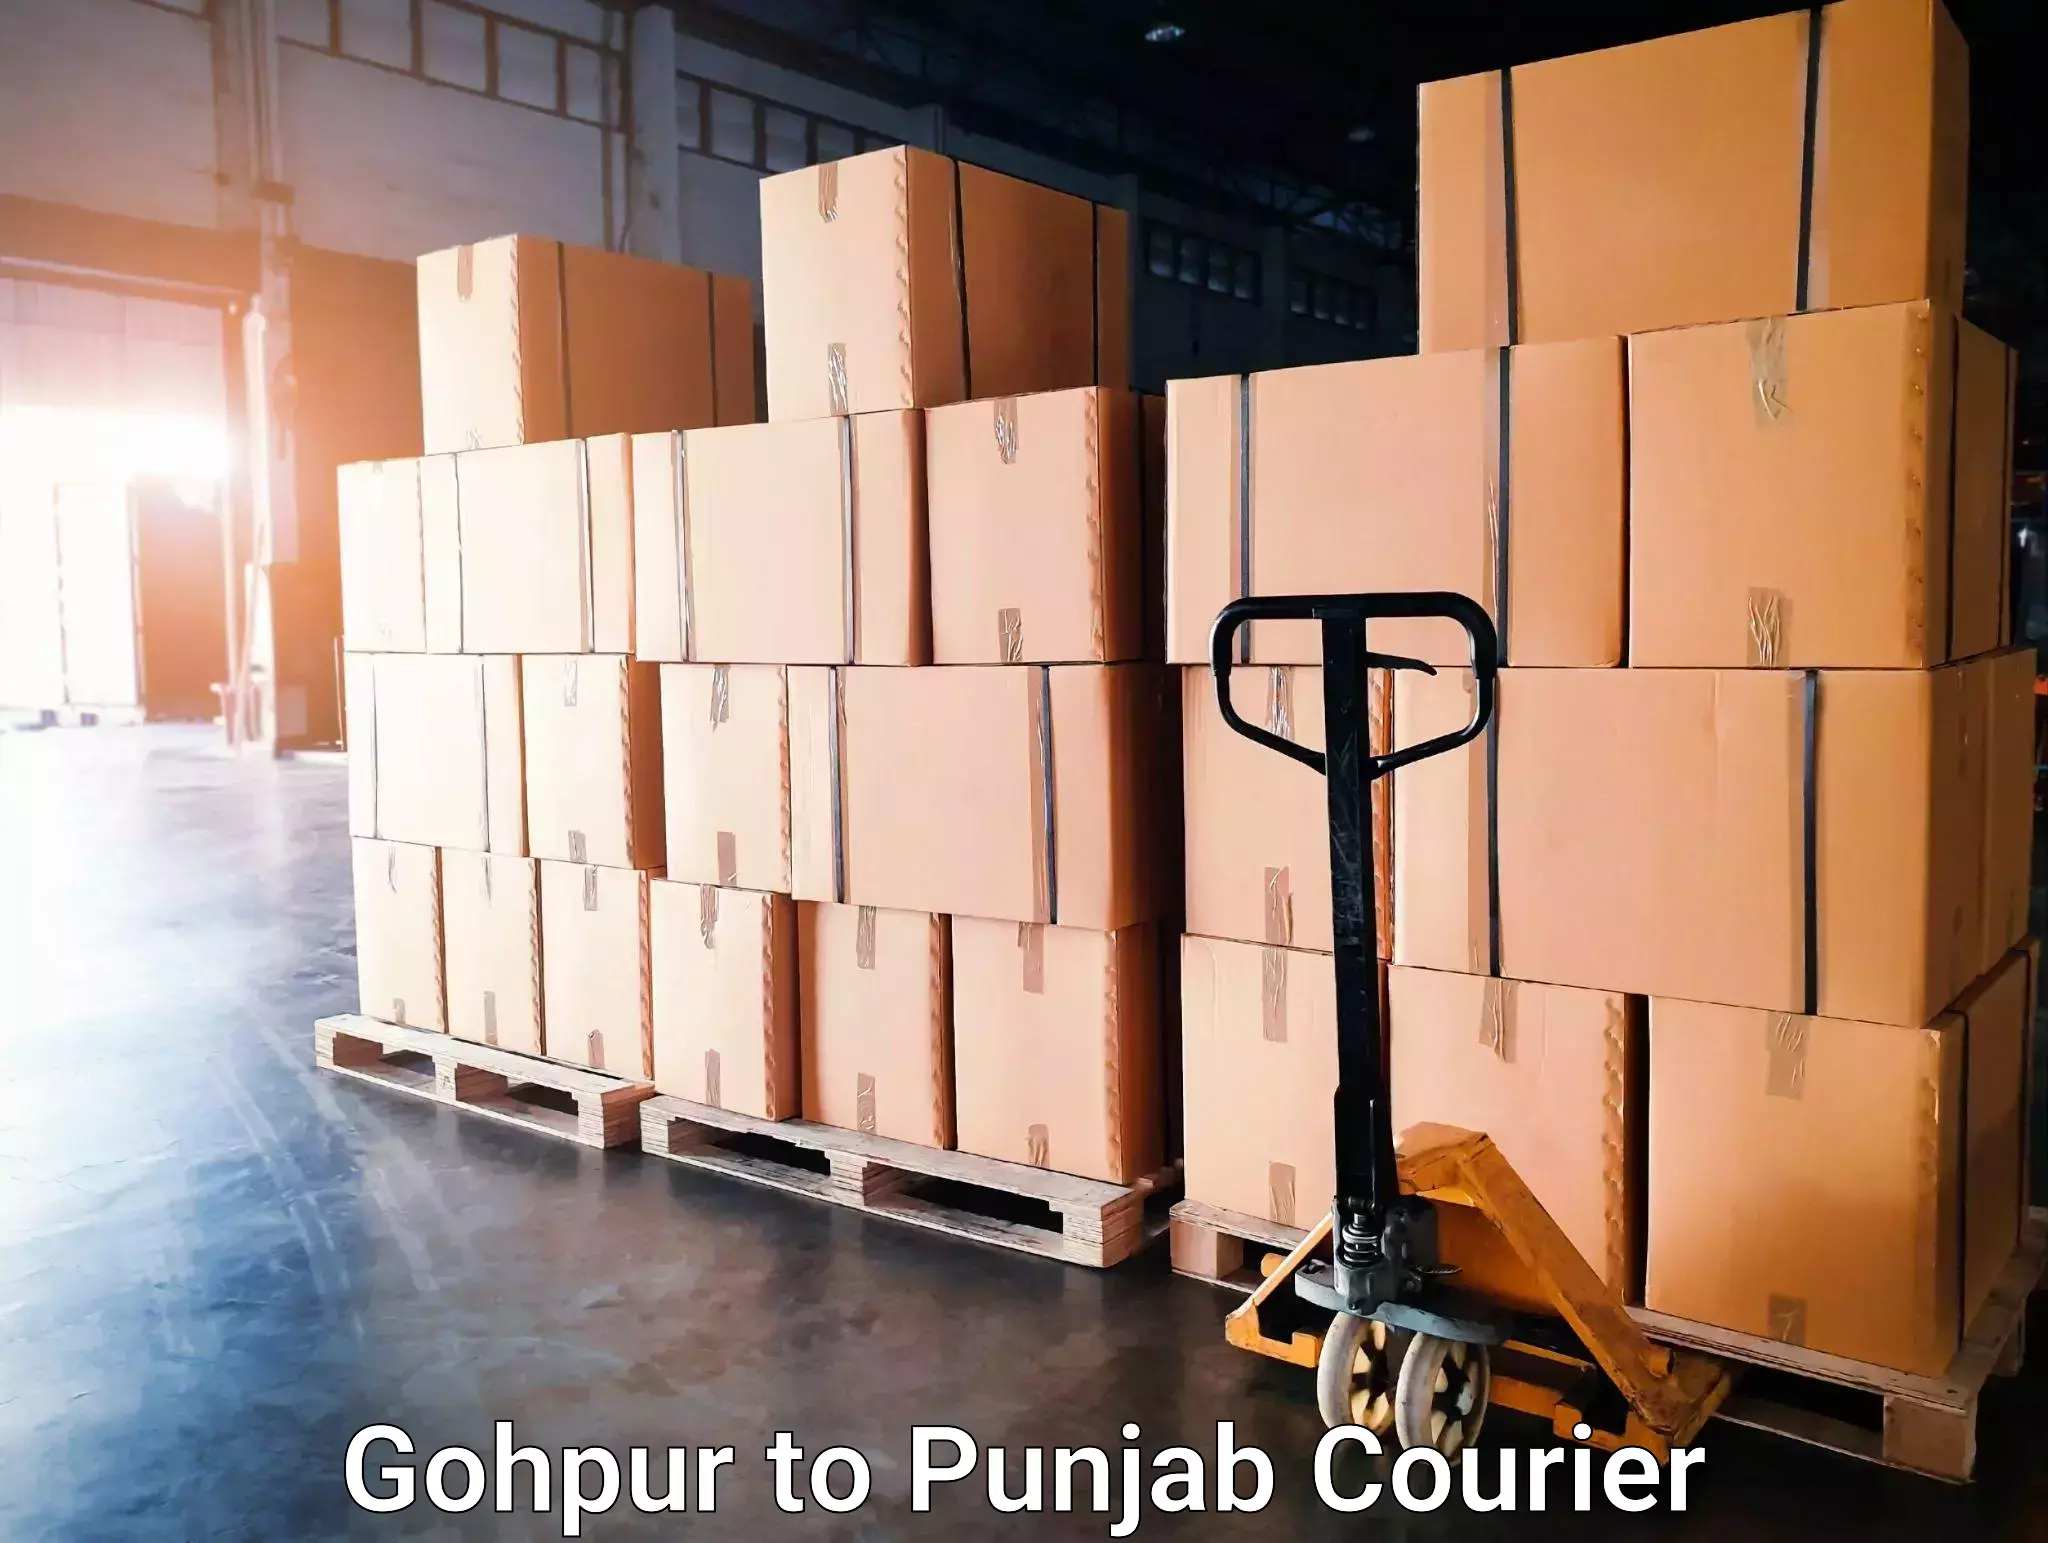 24-hour courier service in Gohpur to Hoshiarpur